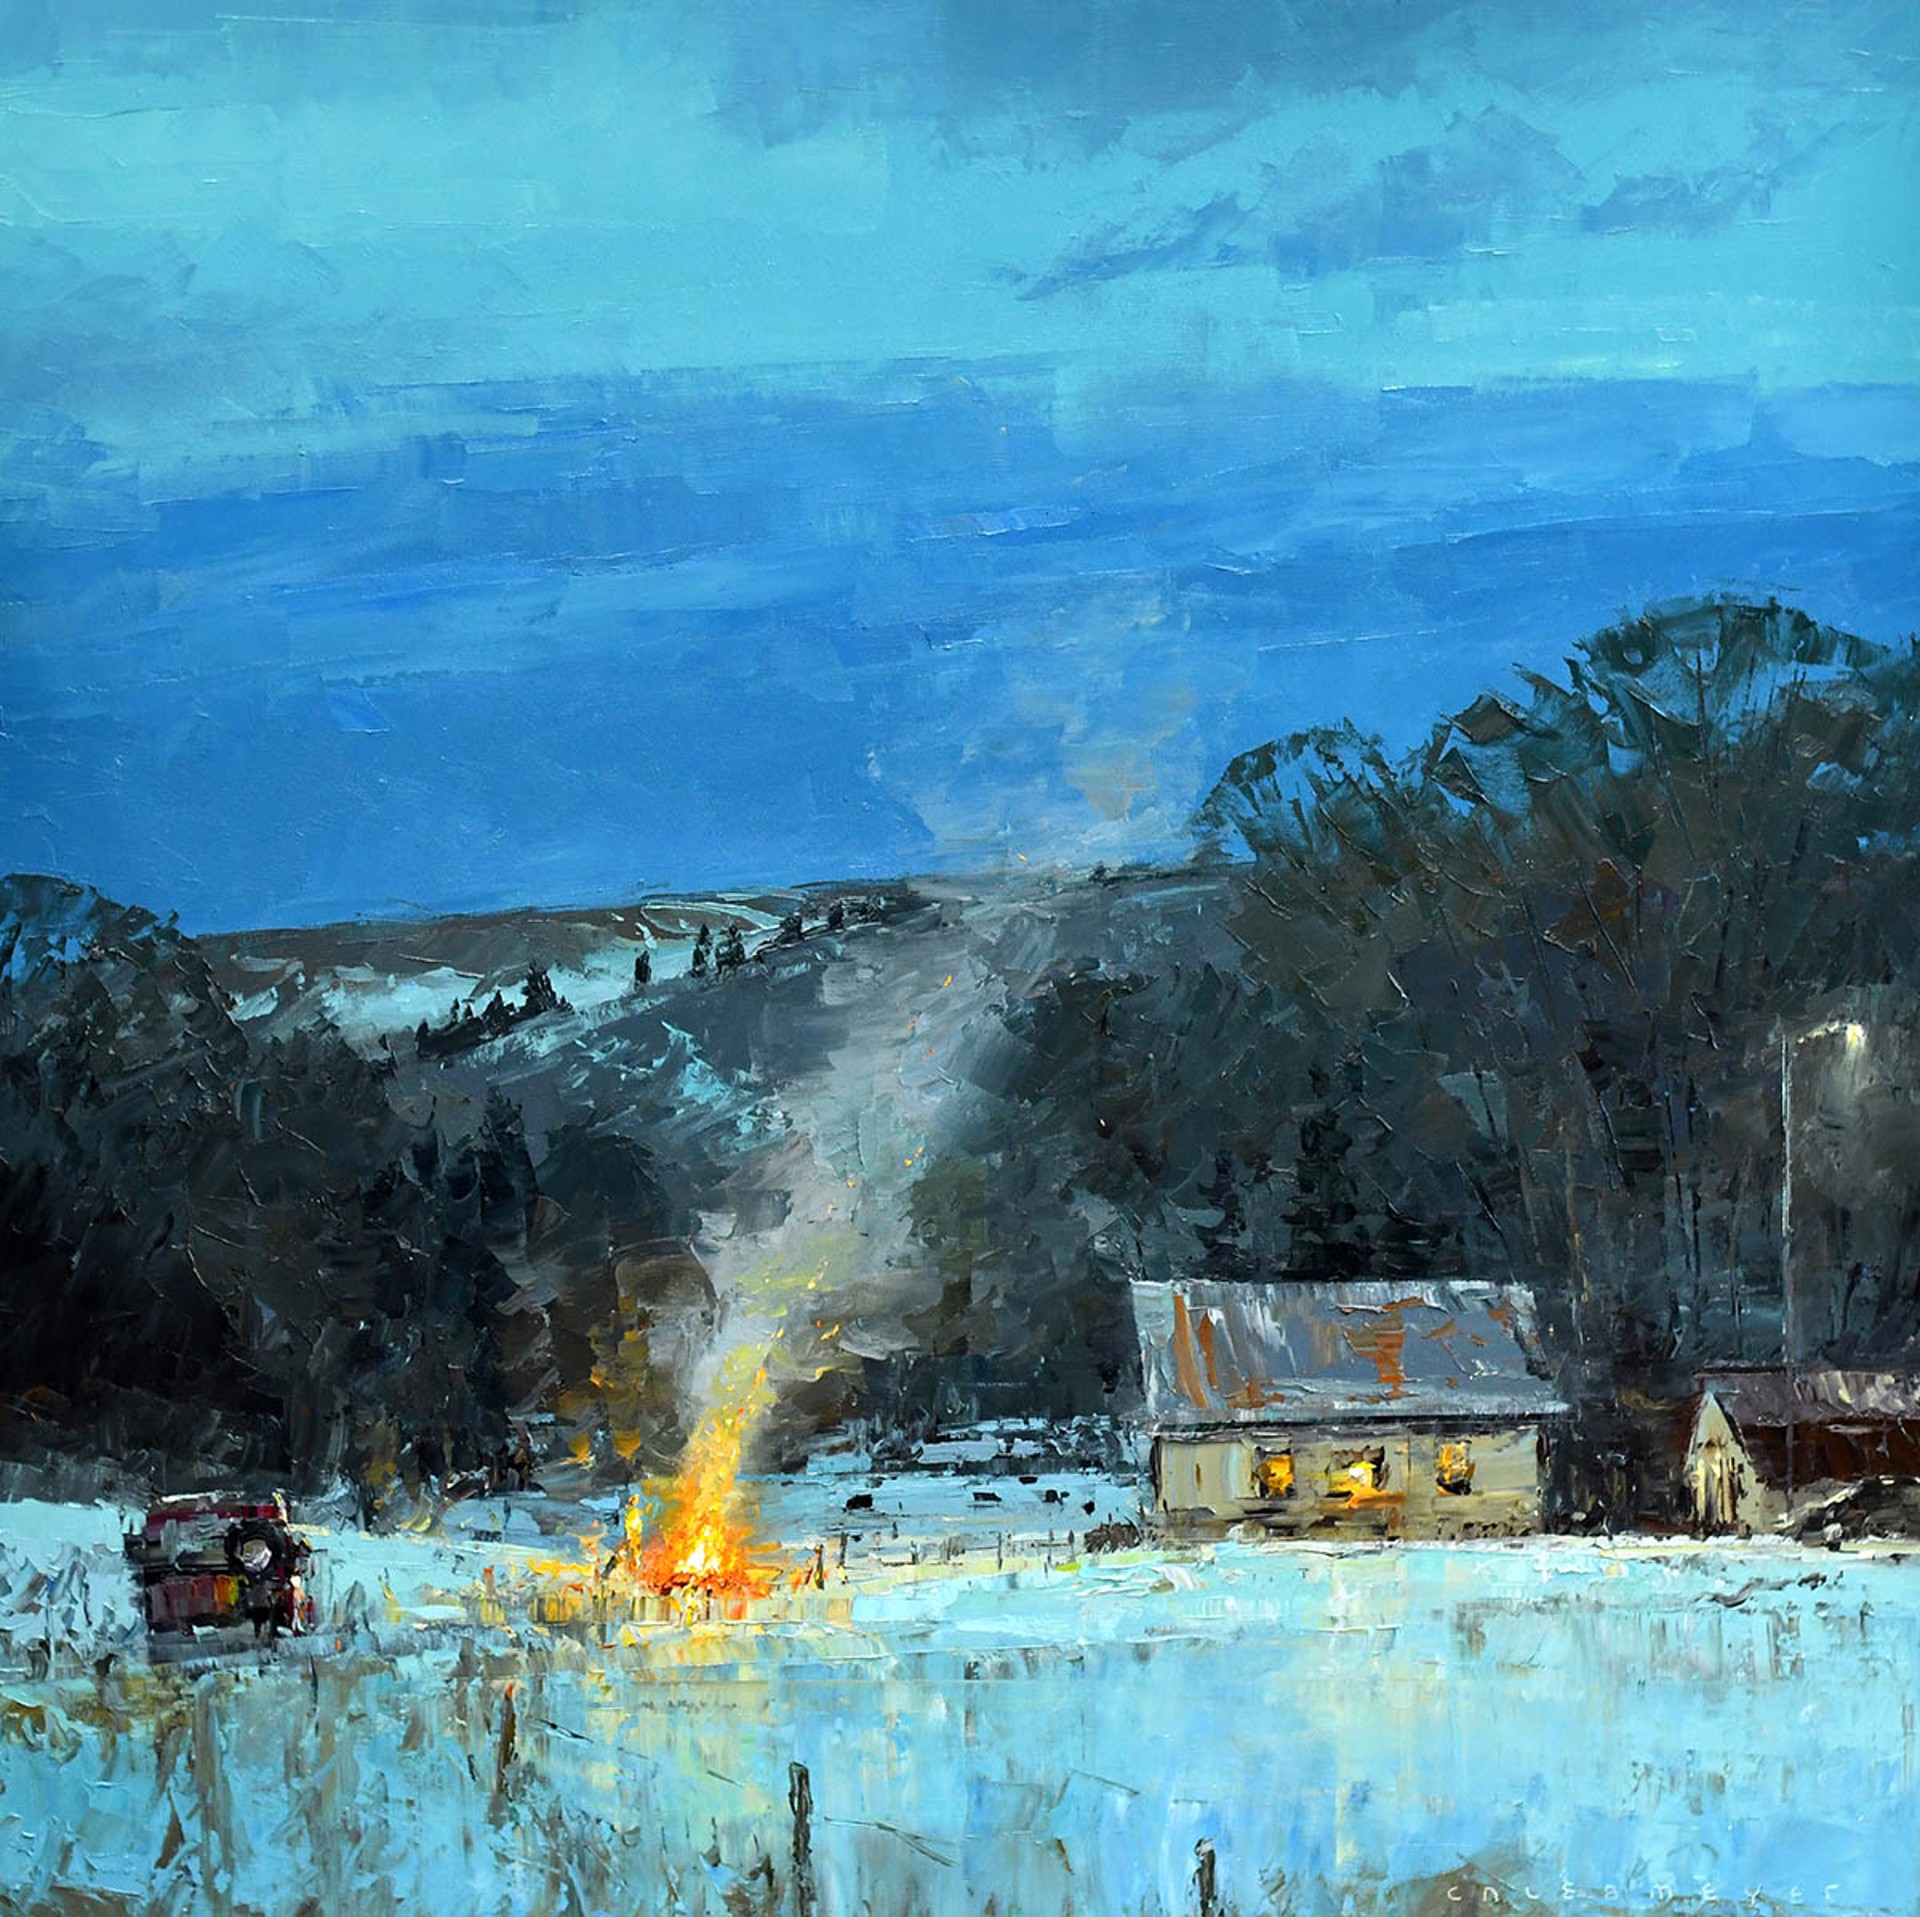 Original Oil Painting By Caleb Meyer Featuring A Cabin In The Woods At Dusk With A Bonfire And A Truck Pulled Off The Road